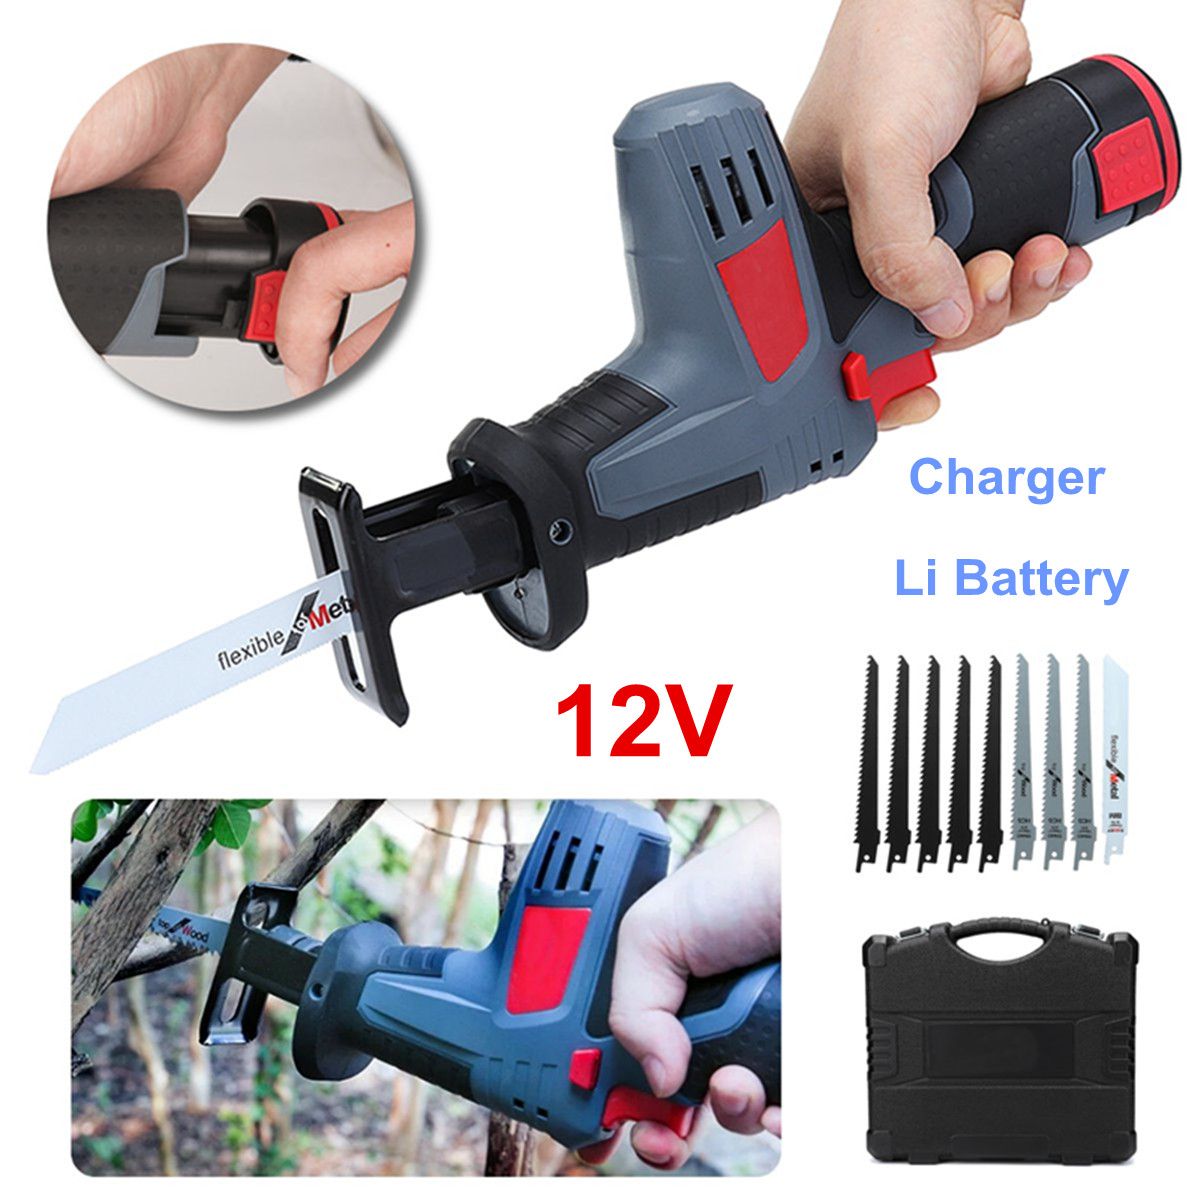 12V-Cordless-One-Handed-Reciprocating-Saw-Kit-Power-Saw-Tool-Kit-1318191